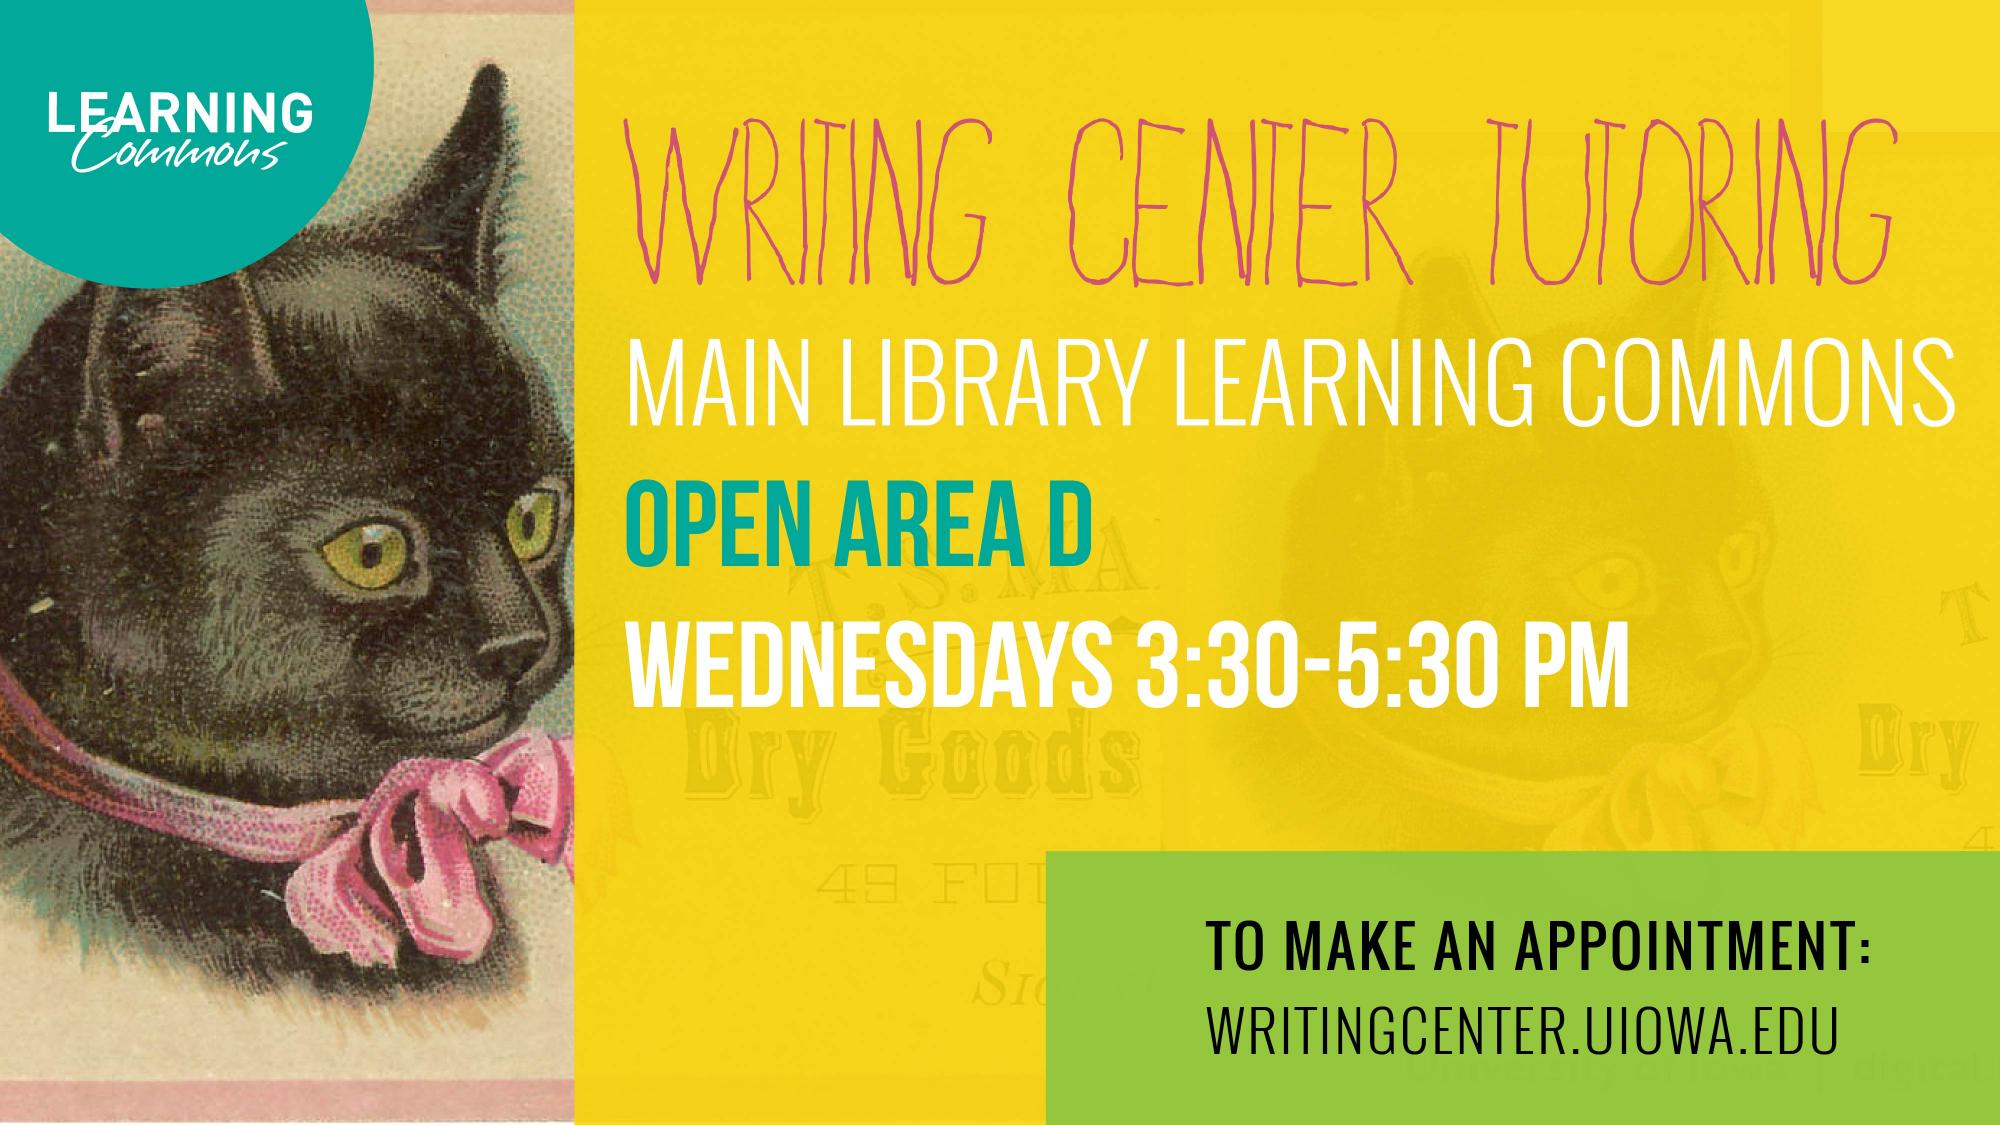 Writing Center Tutoring Wednesdays 3:30-5:30pm in Open Area D in the Main Library Learning Commons. To make an appointment go to writingcenter.uiowa.edu